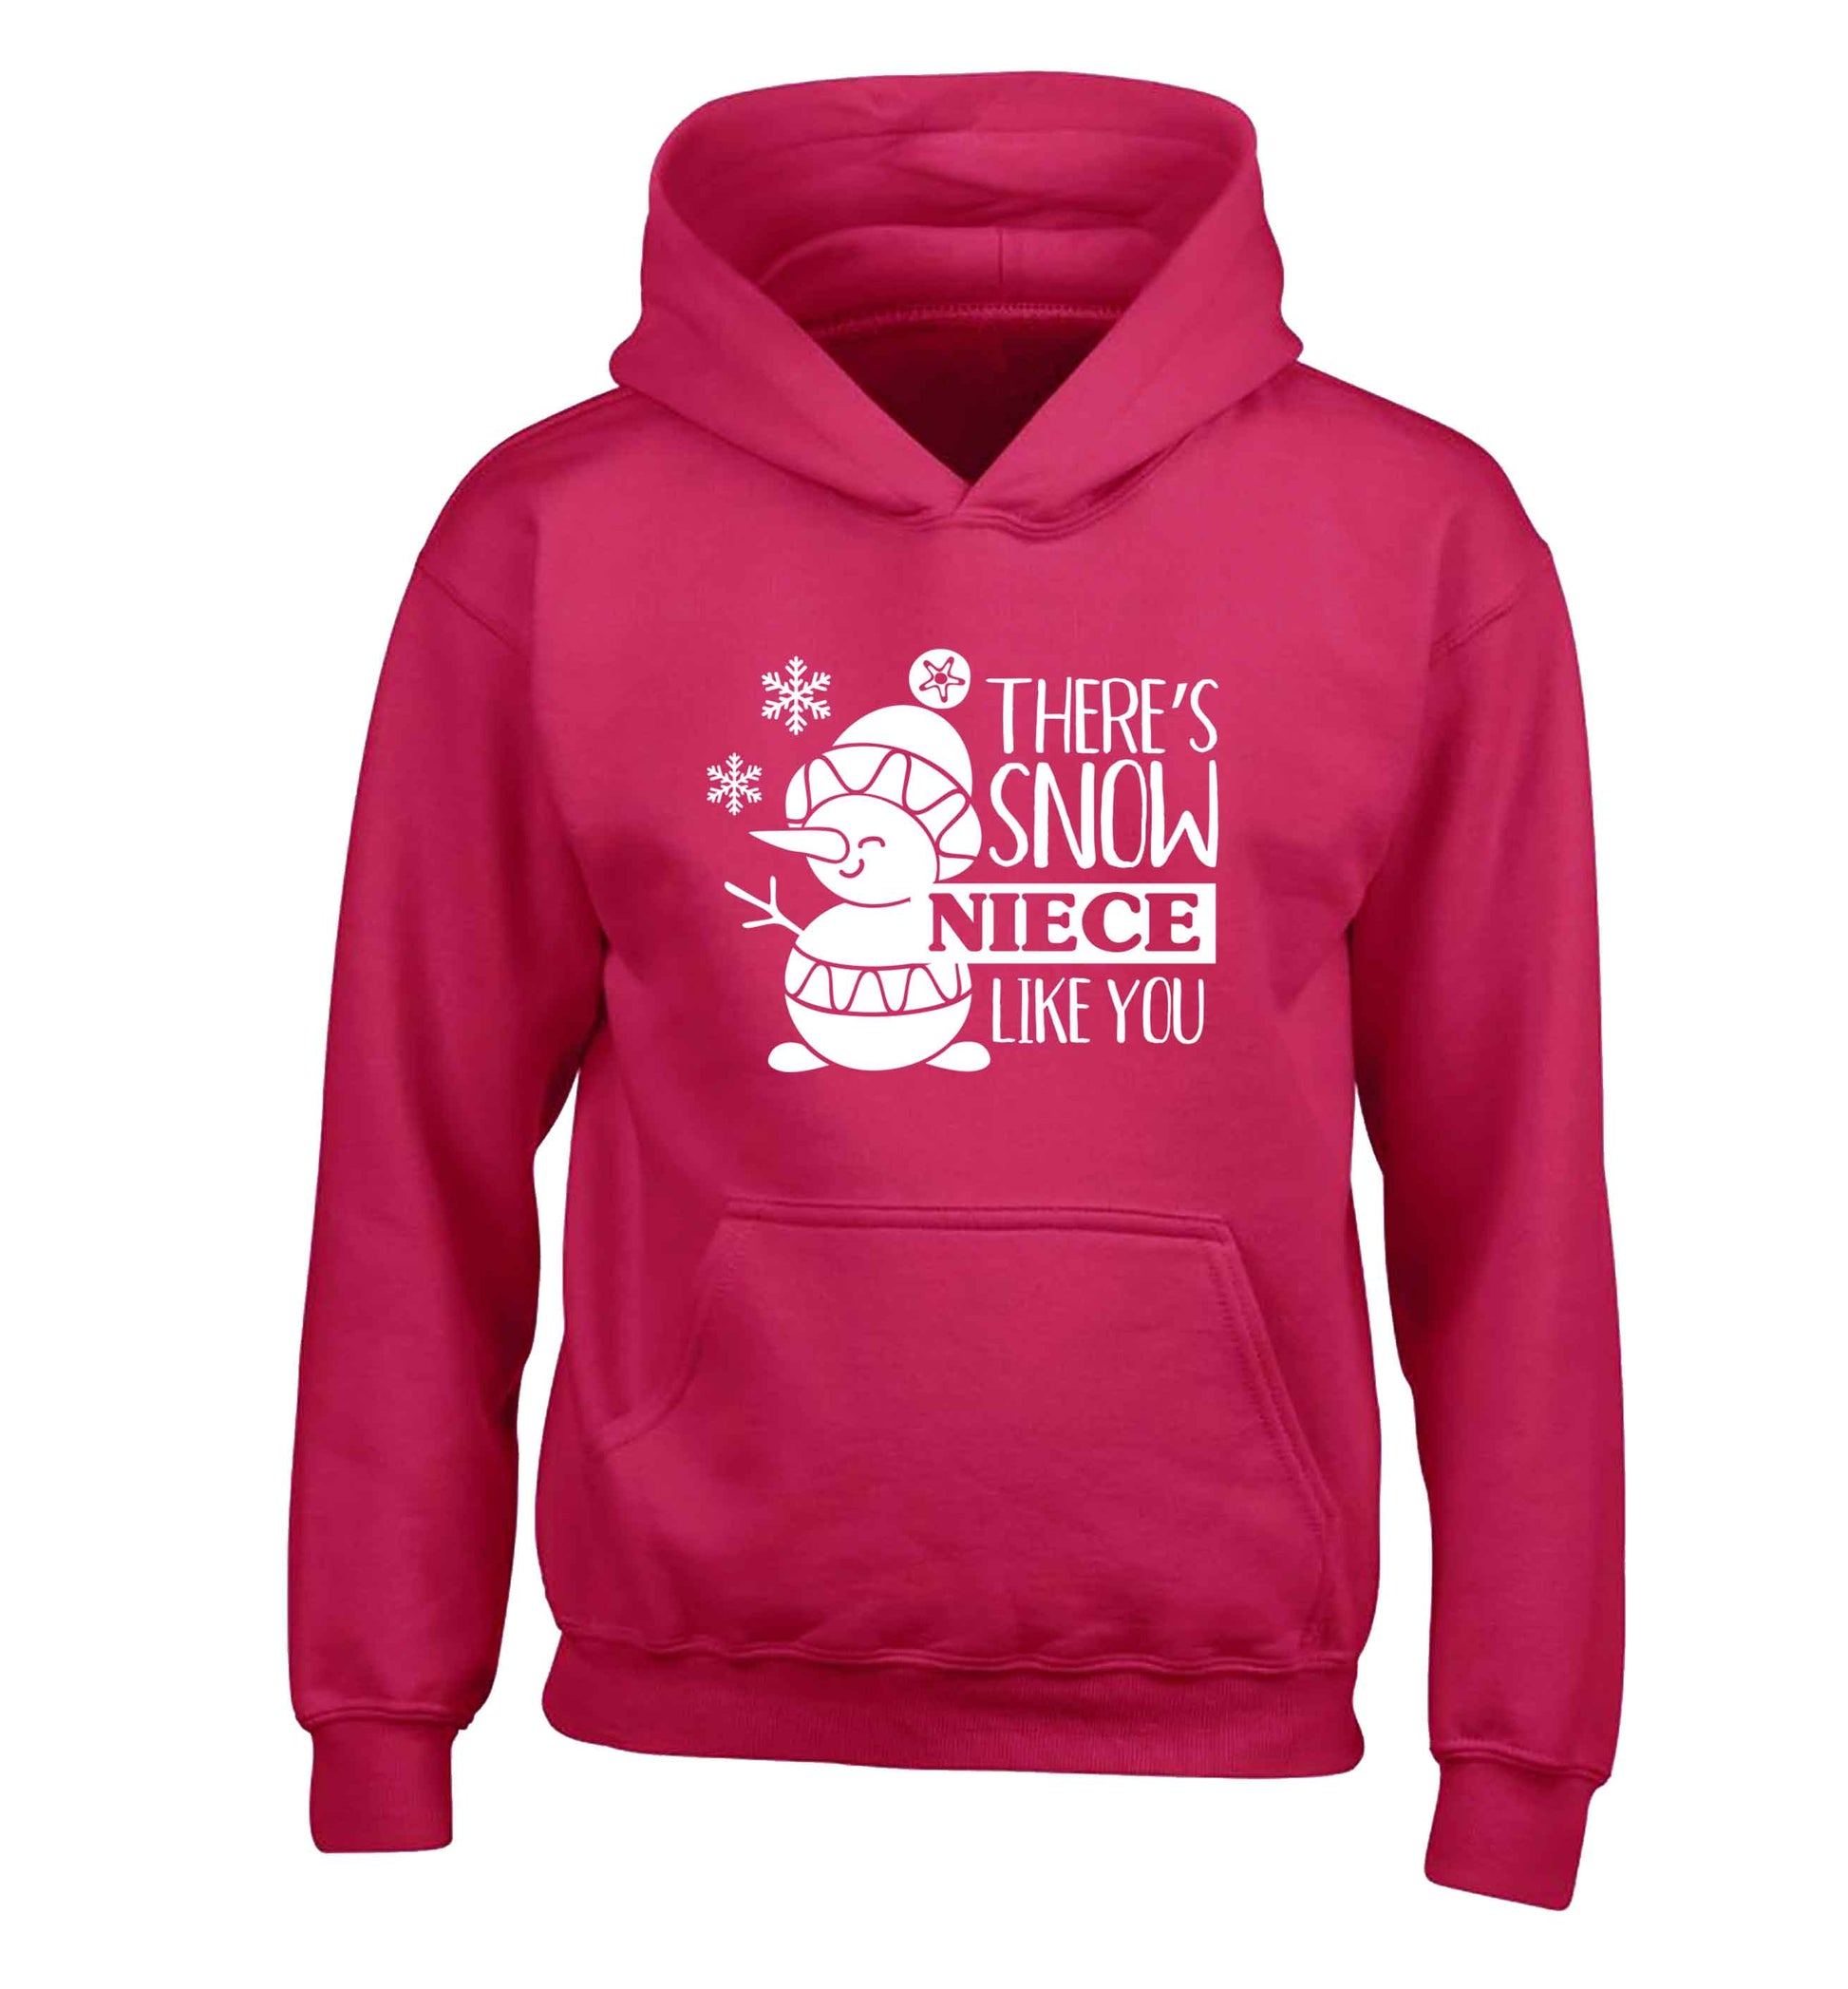 There's snow niece like you children's pink hoodie 12-13 Years